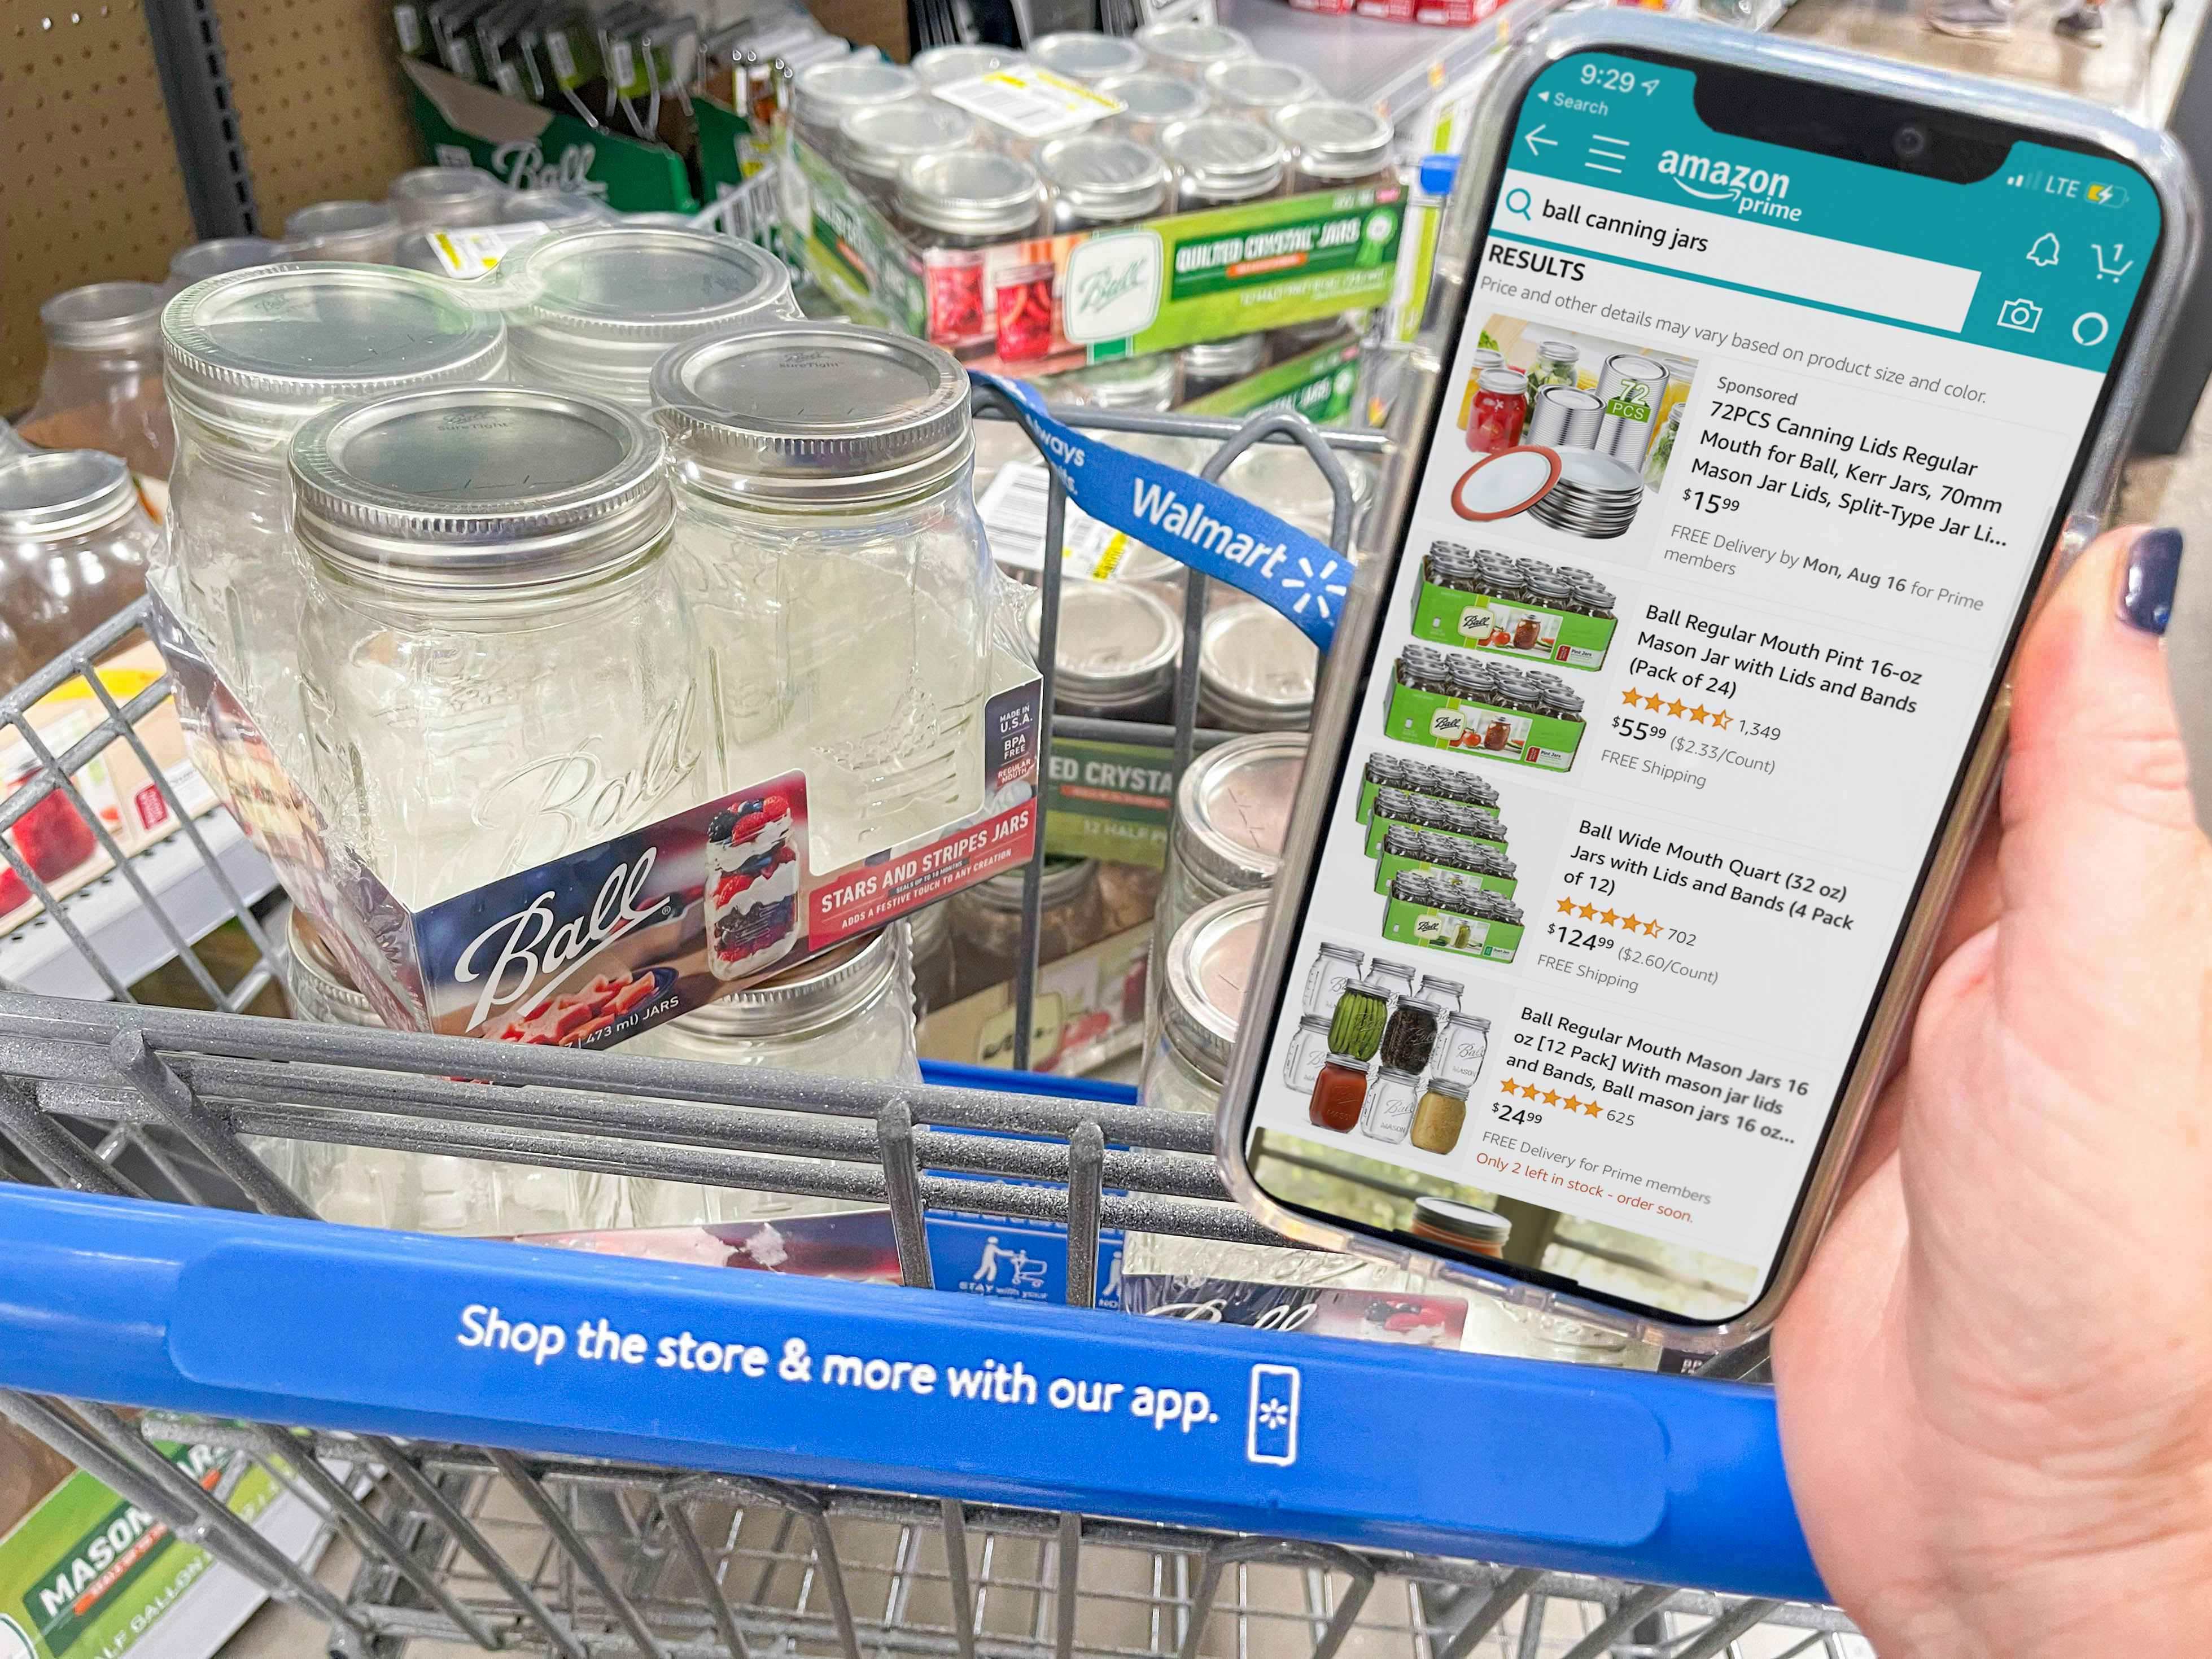 A person holding a cellphone displaying Ball canning jars on the Amazon app to compare prices with Walmart products sitting in a shopping cart behind the phone.